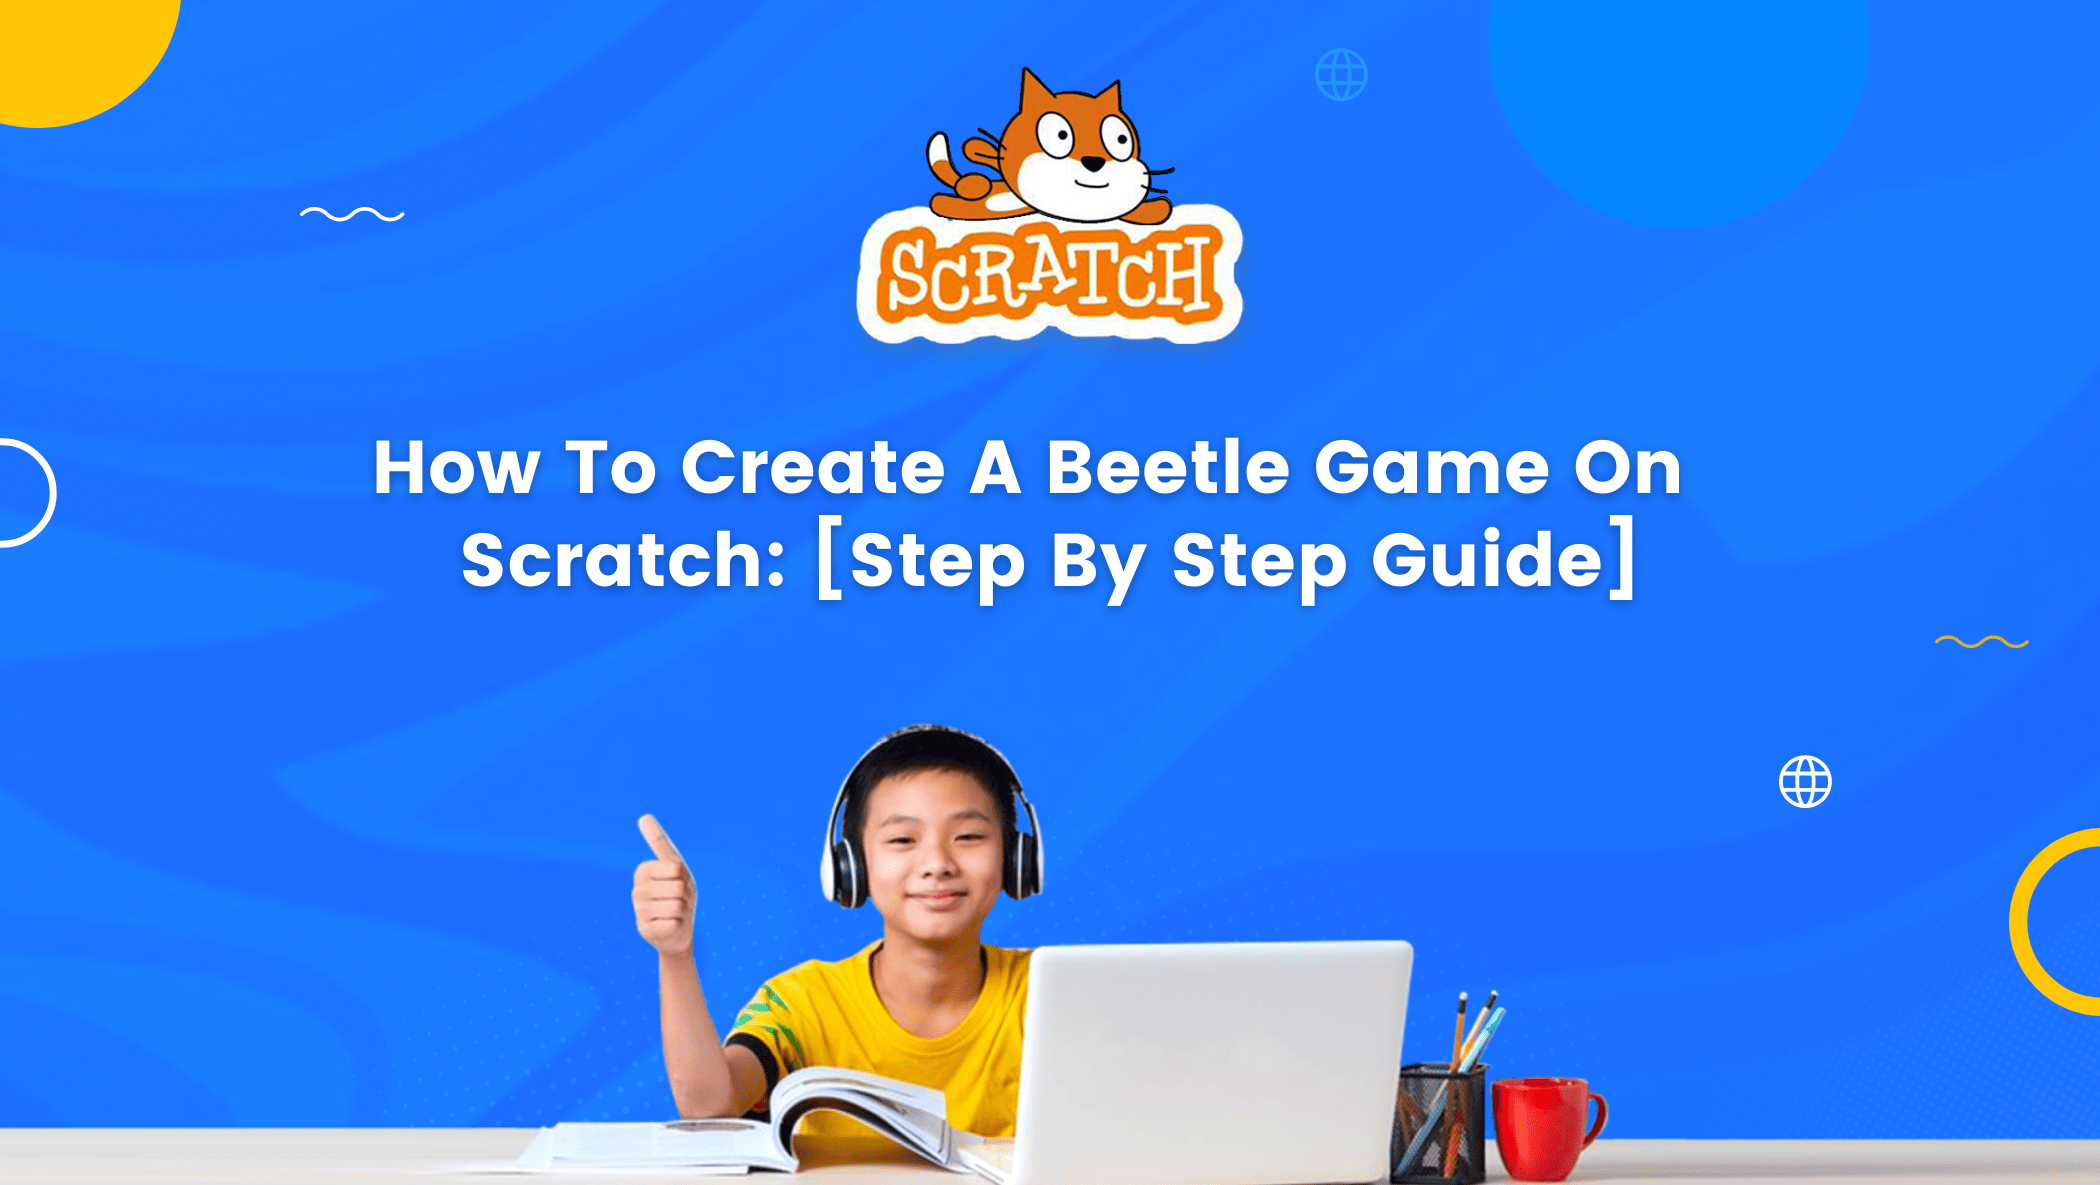 How To Create A Beetle Game On Scratch